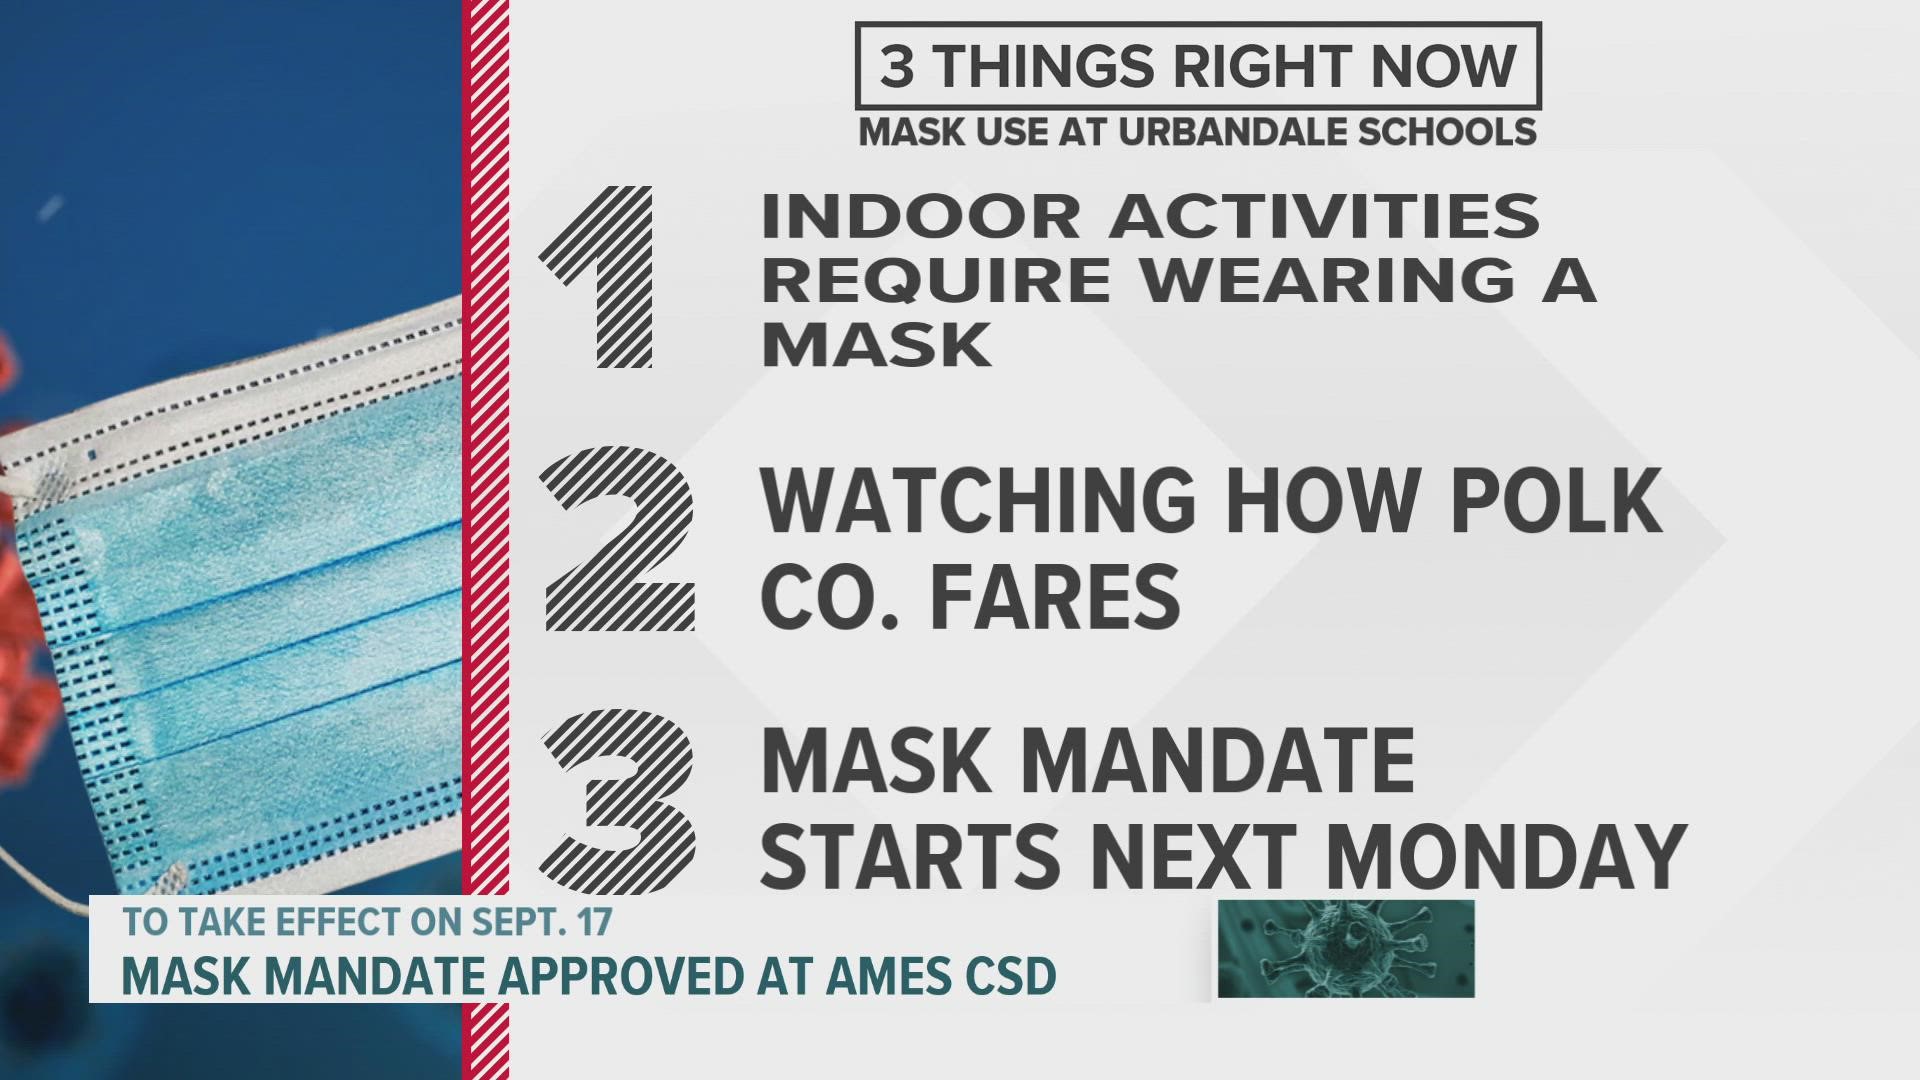 Ames will start requiring masks on Friday while Urbandale will on Monday.